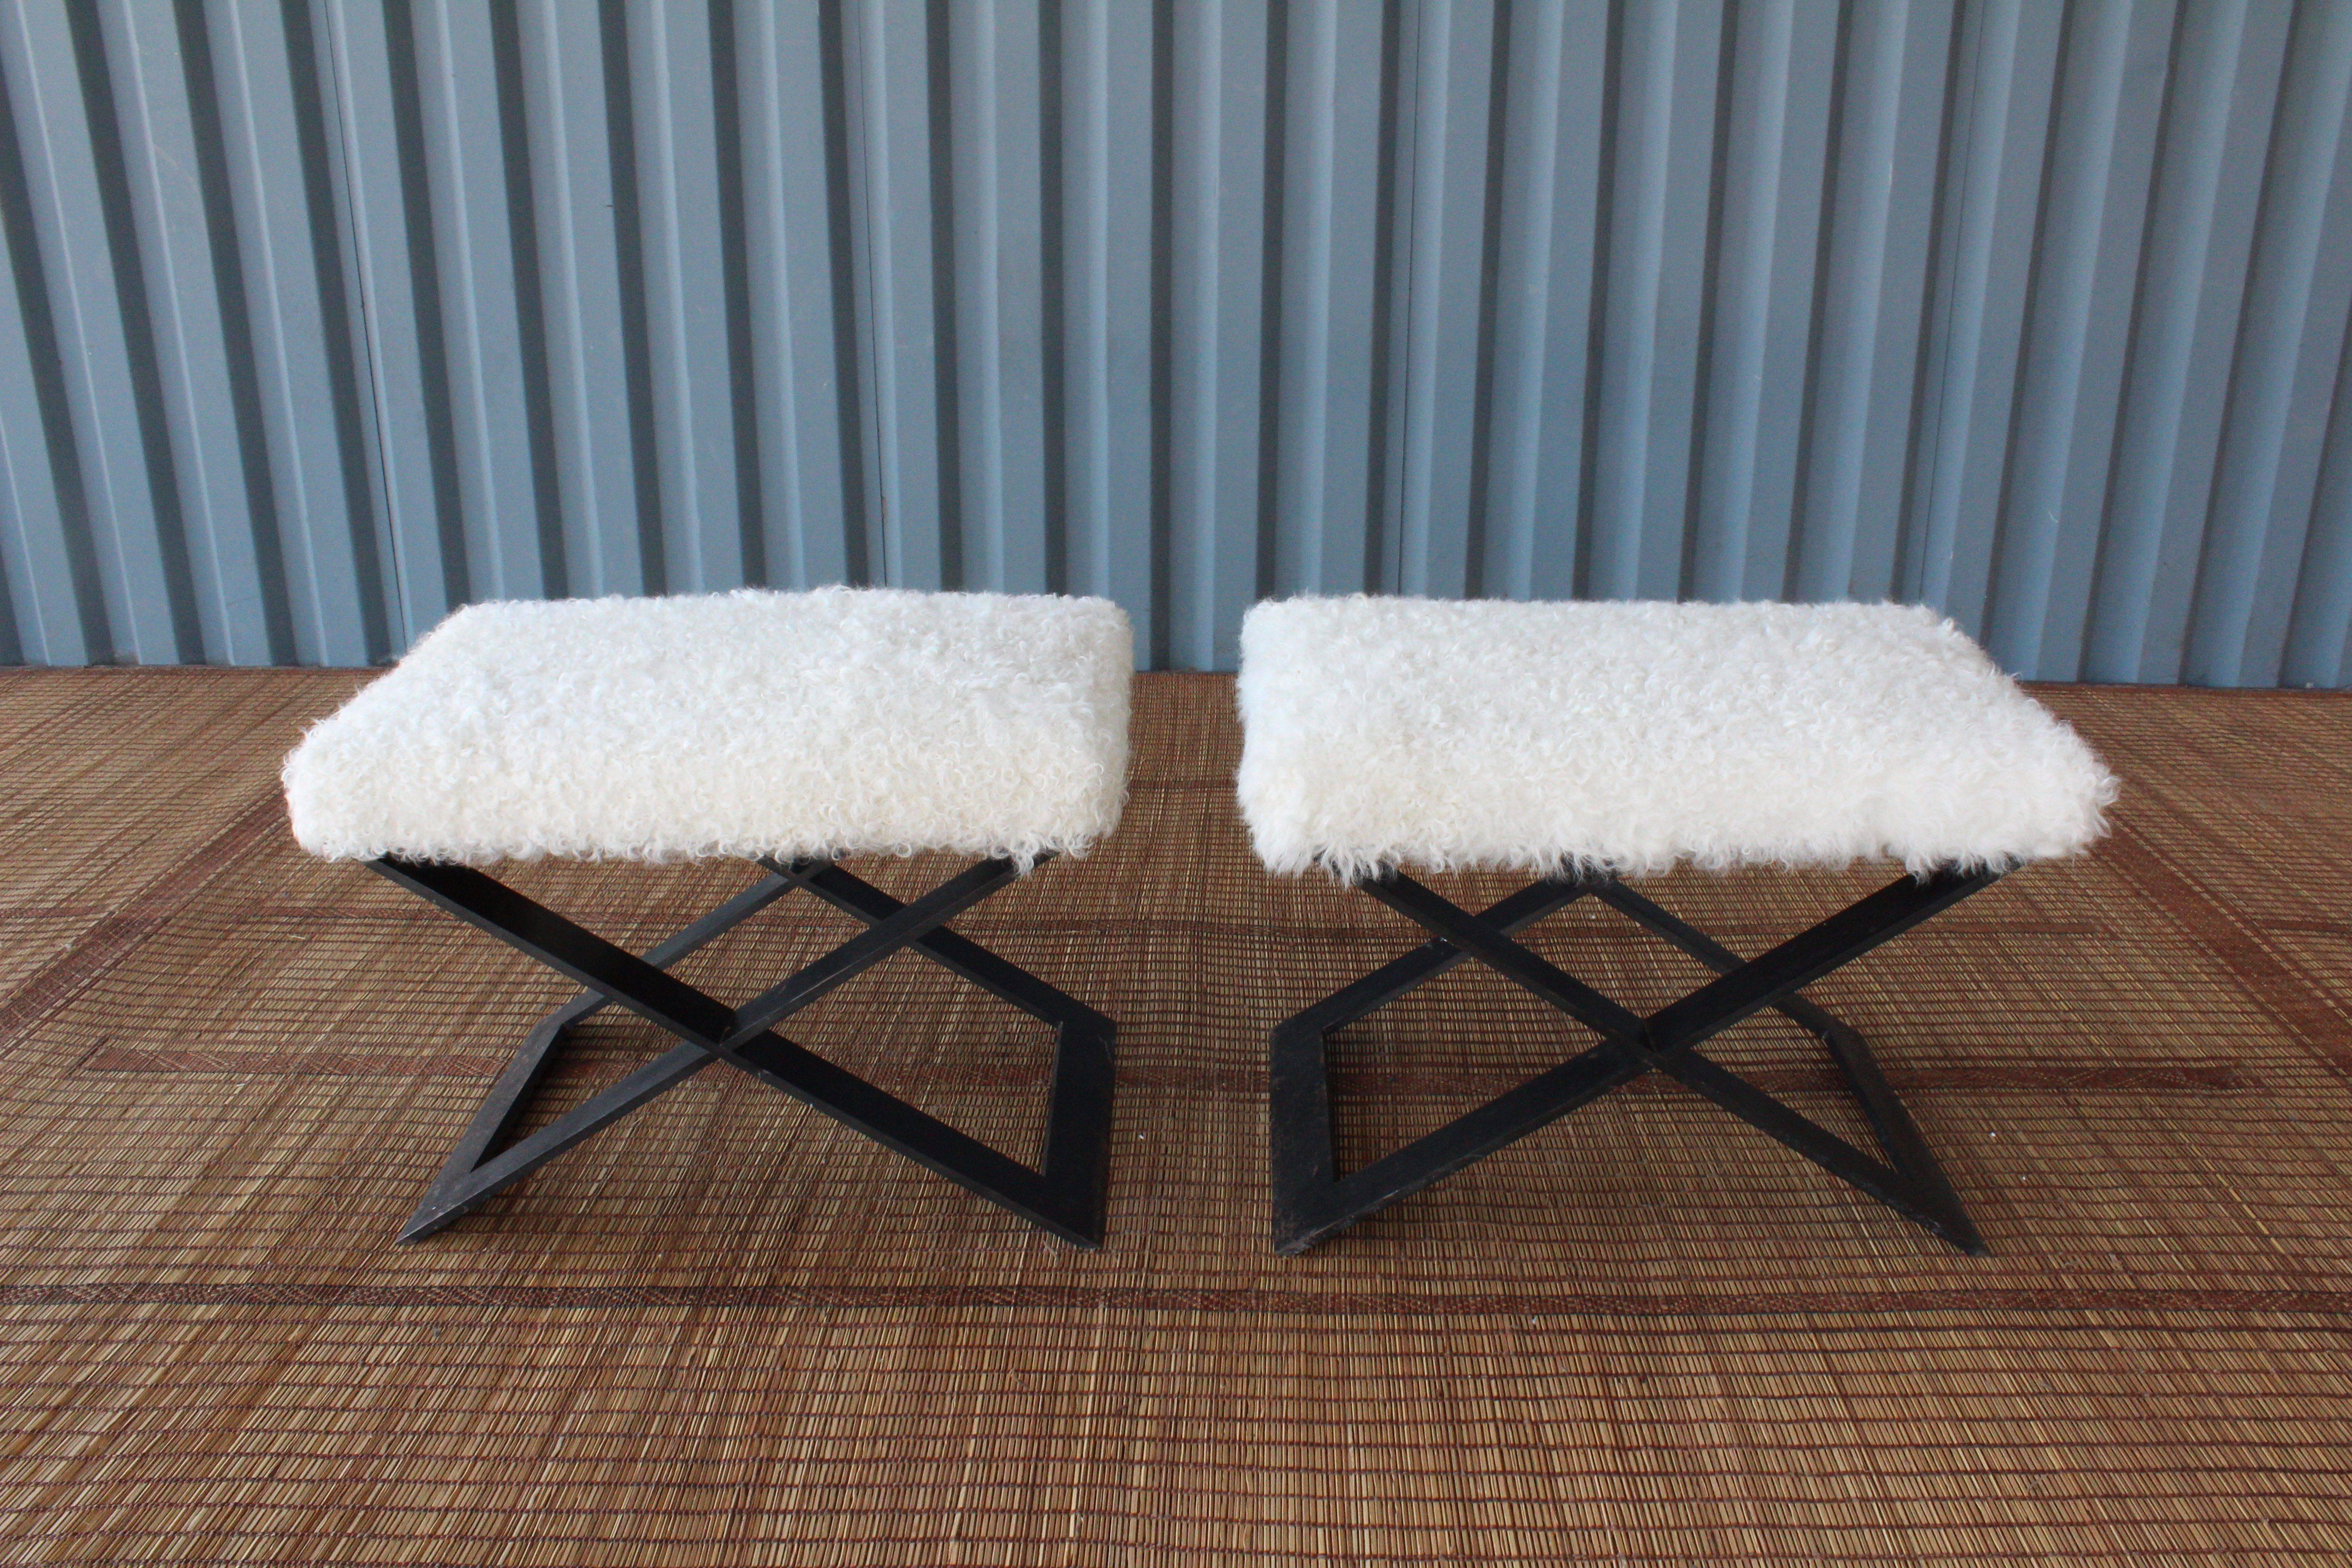 Pair of versatile X-base stools. These stools are made from solid steel and have been newly upholstered in shearling. Bases show age appropriate wear.